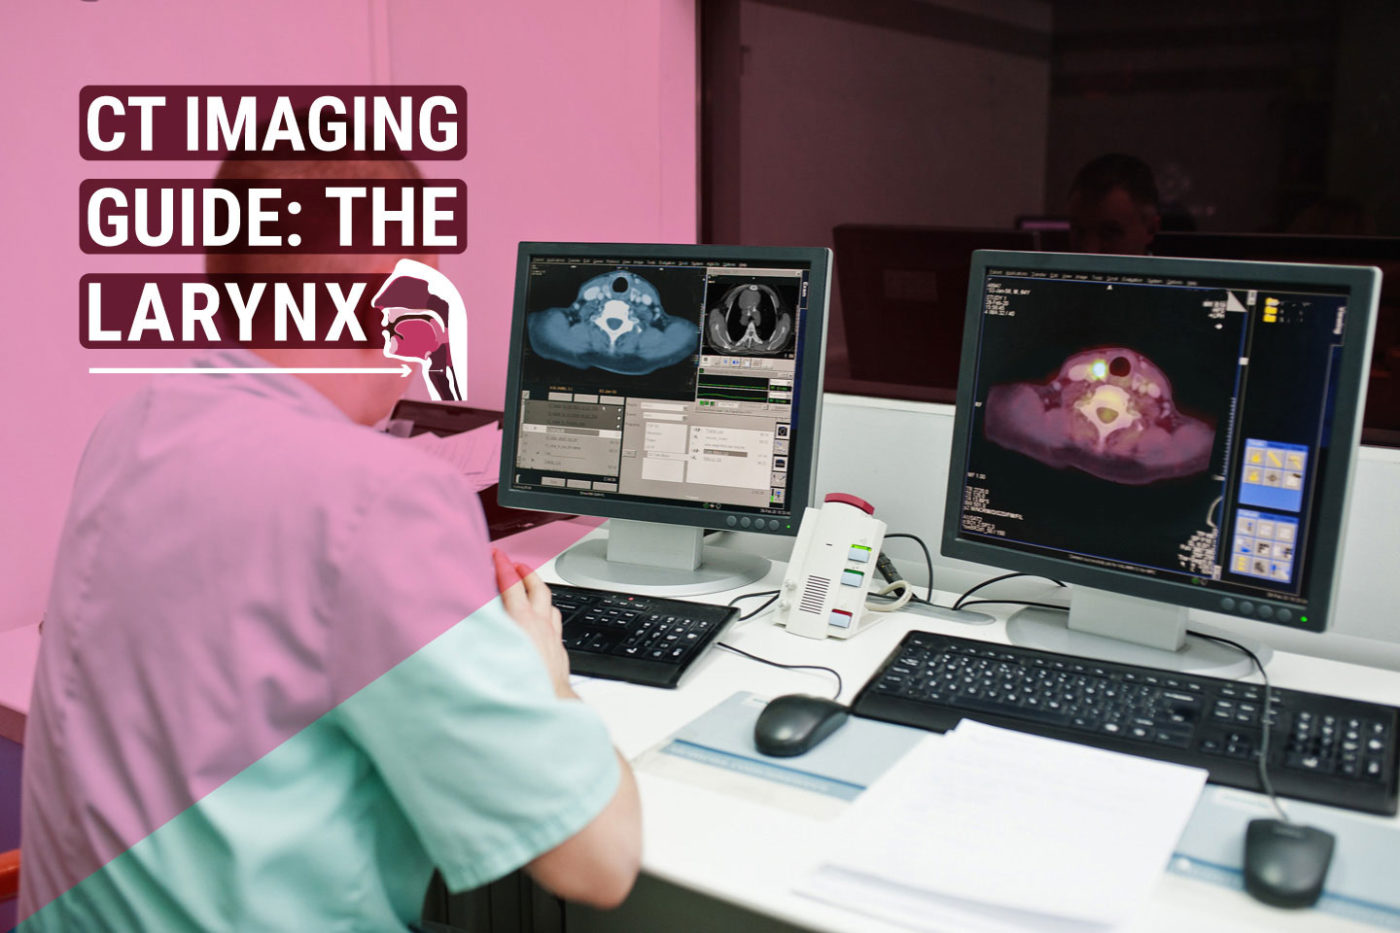 CT Imaging Guide: The Larynx